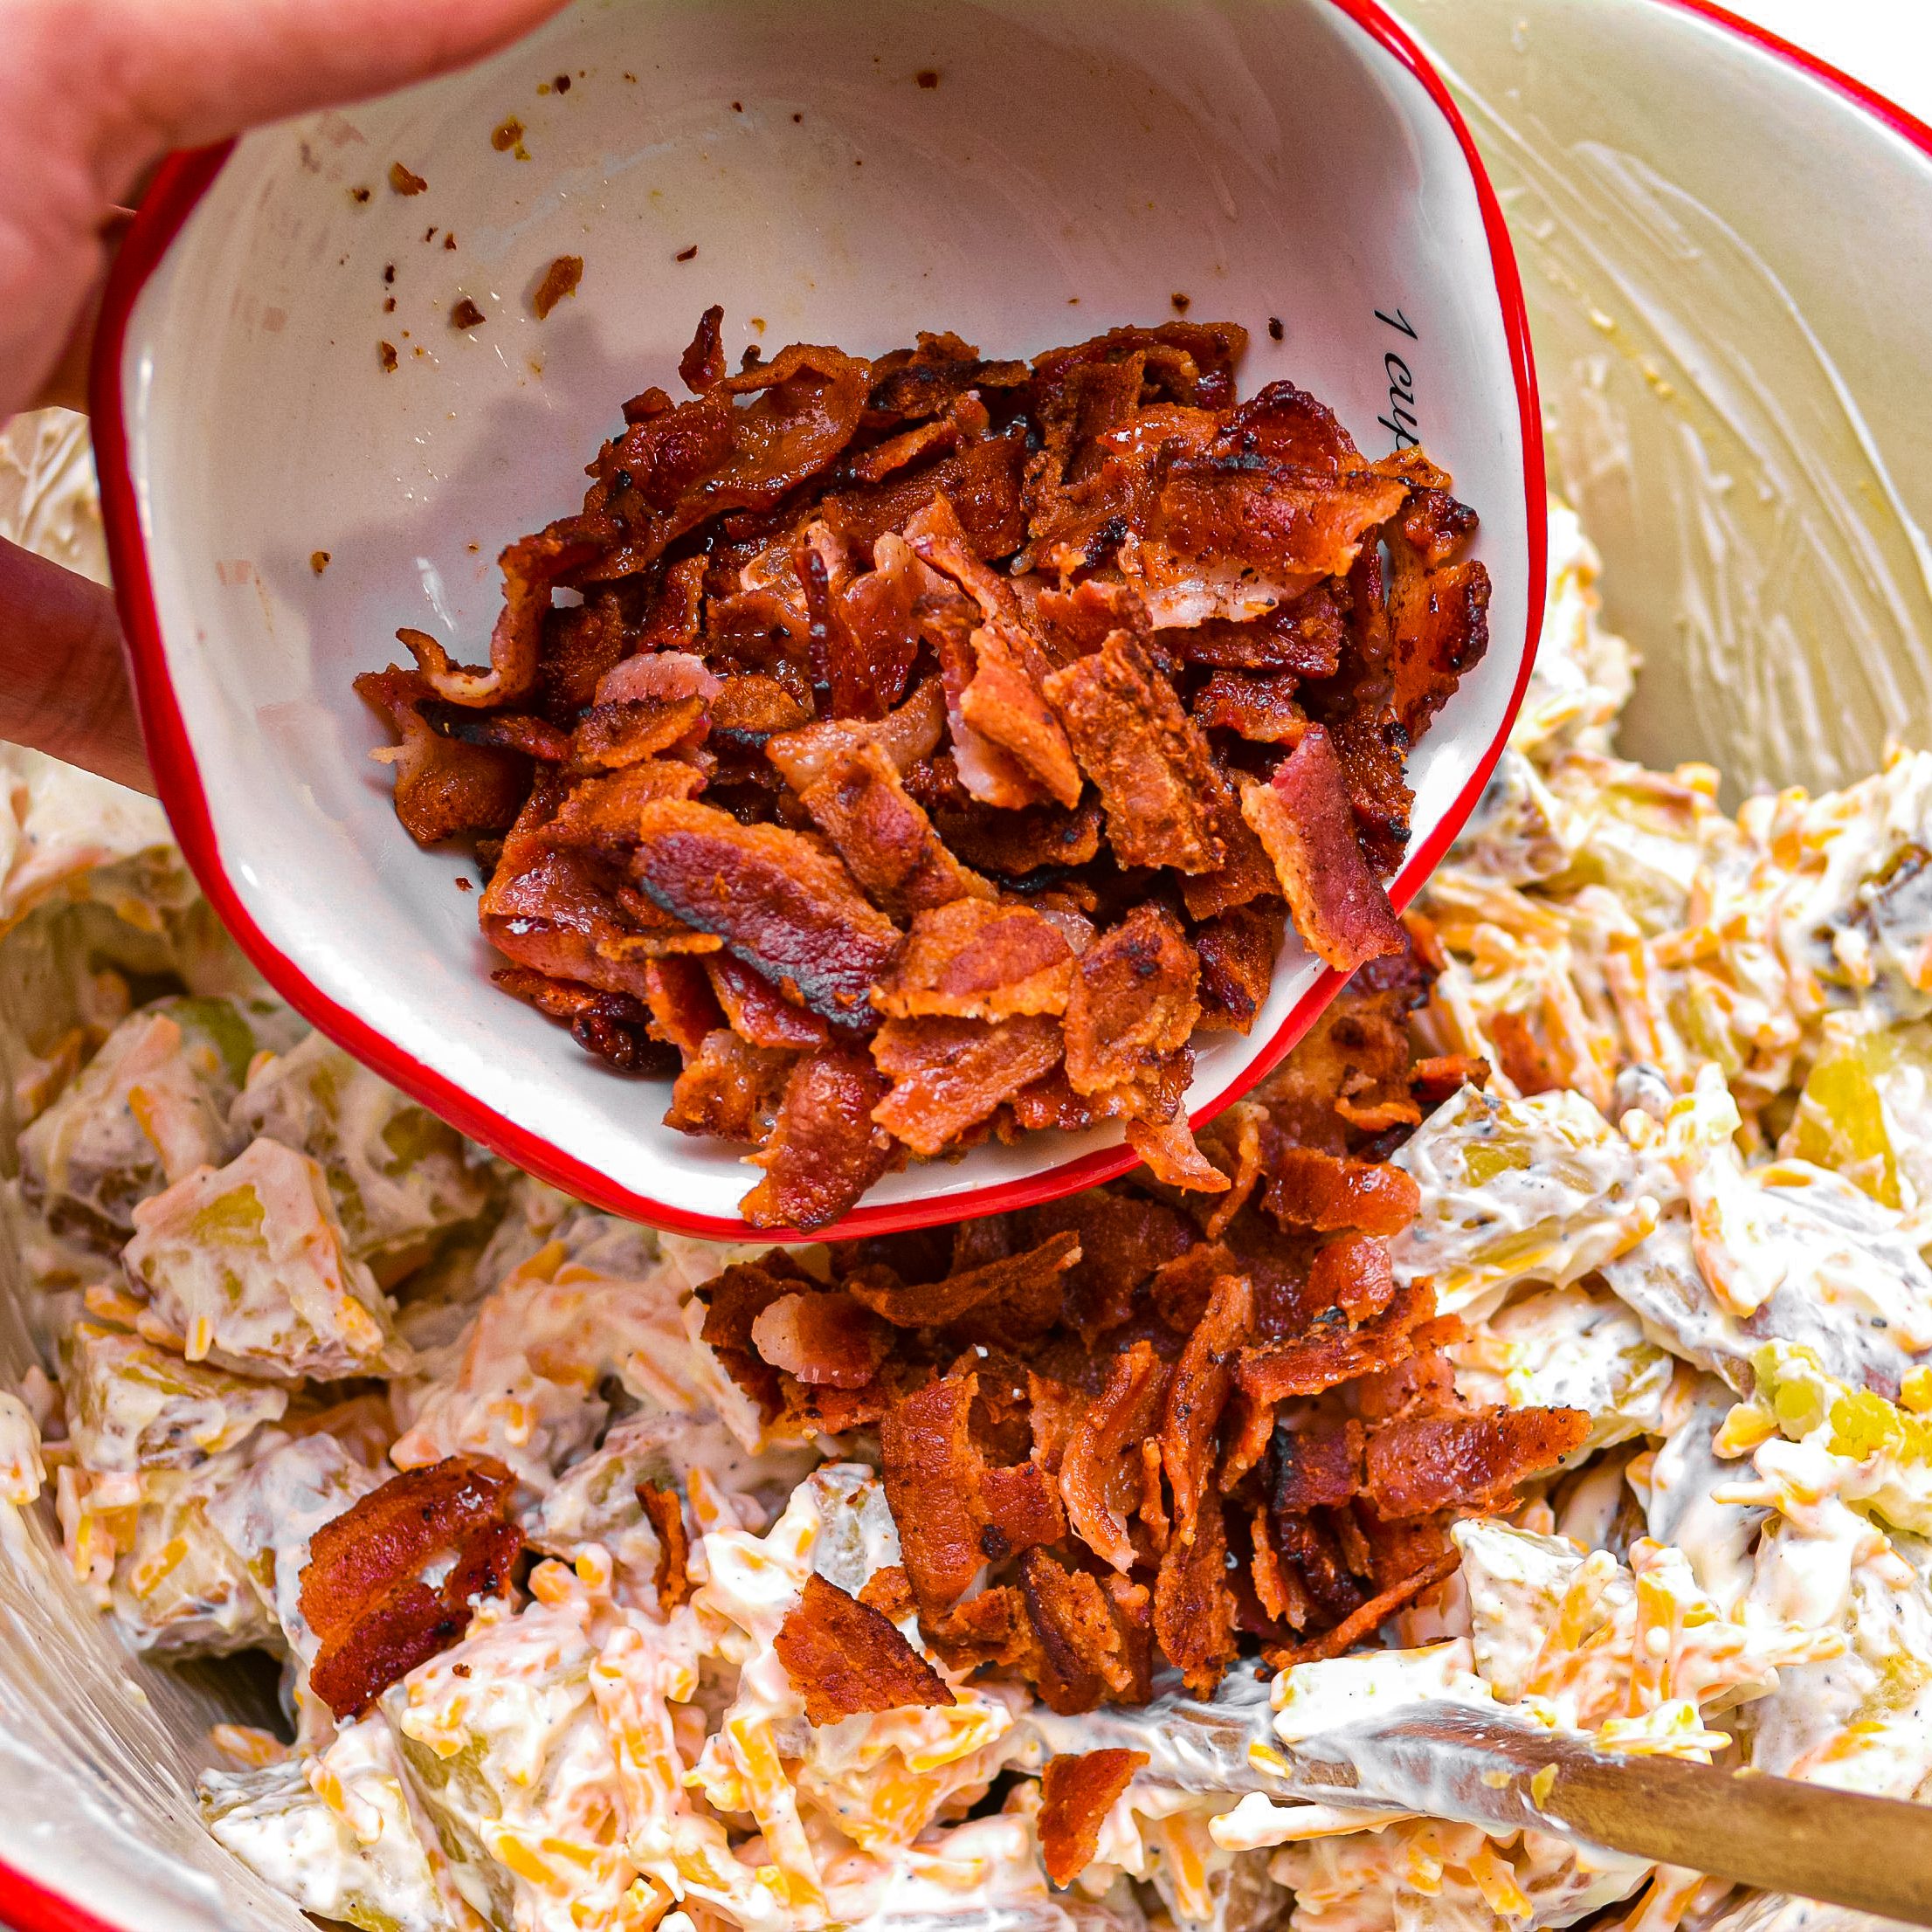  Pour in 12 pieces of crumbled bacon.